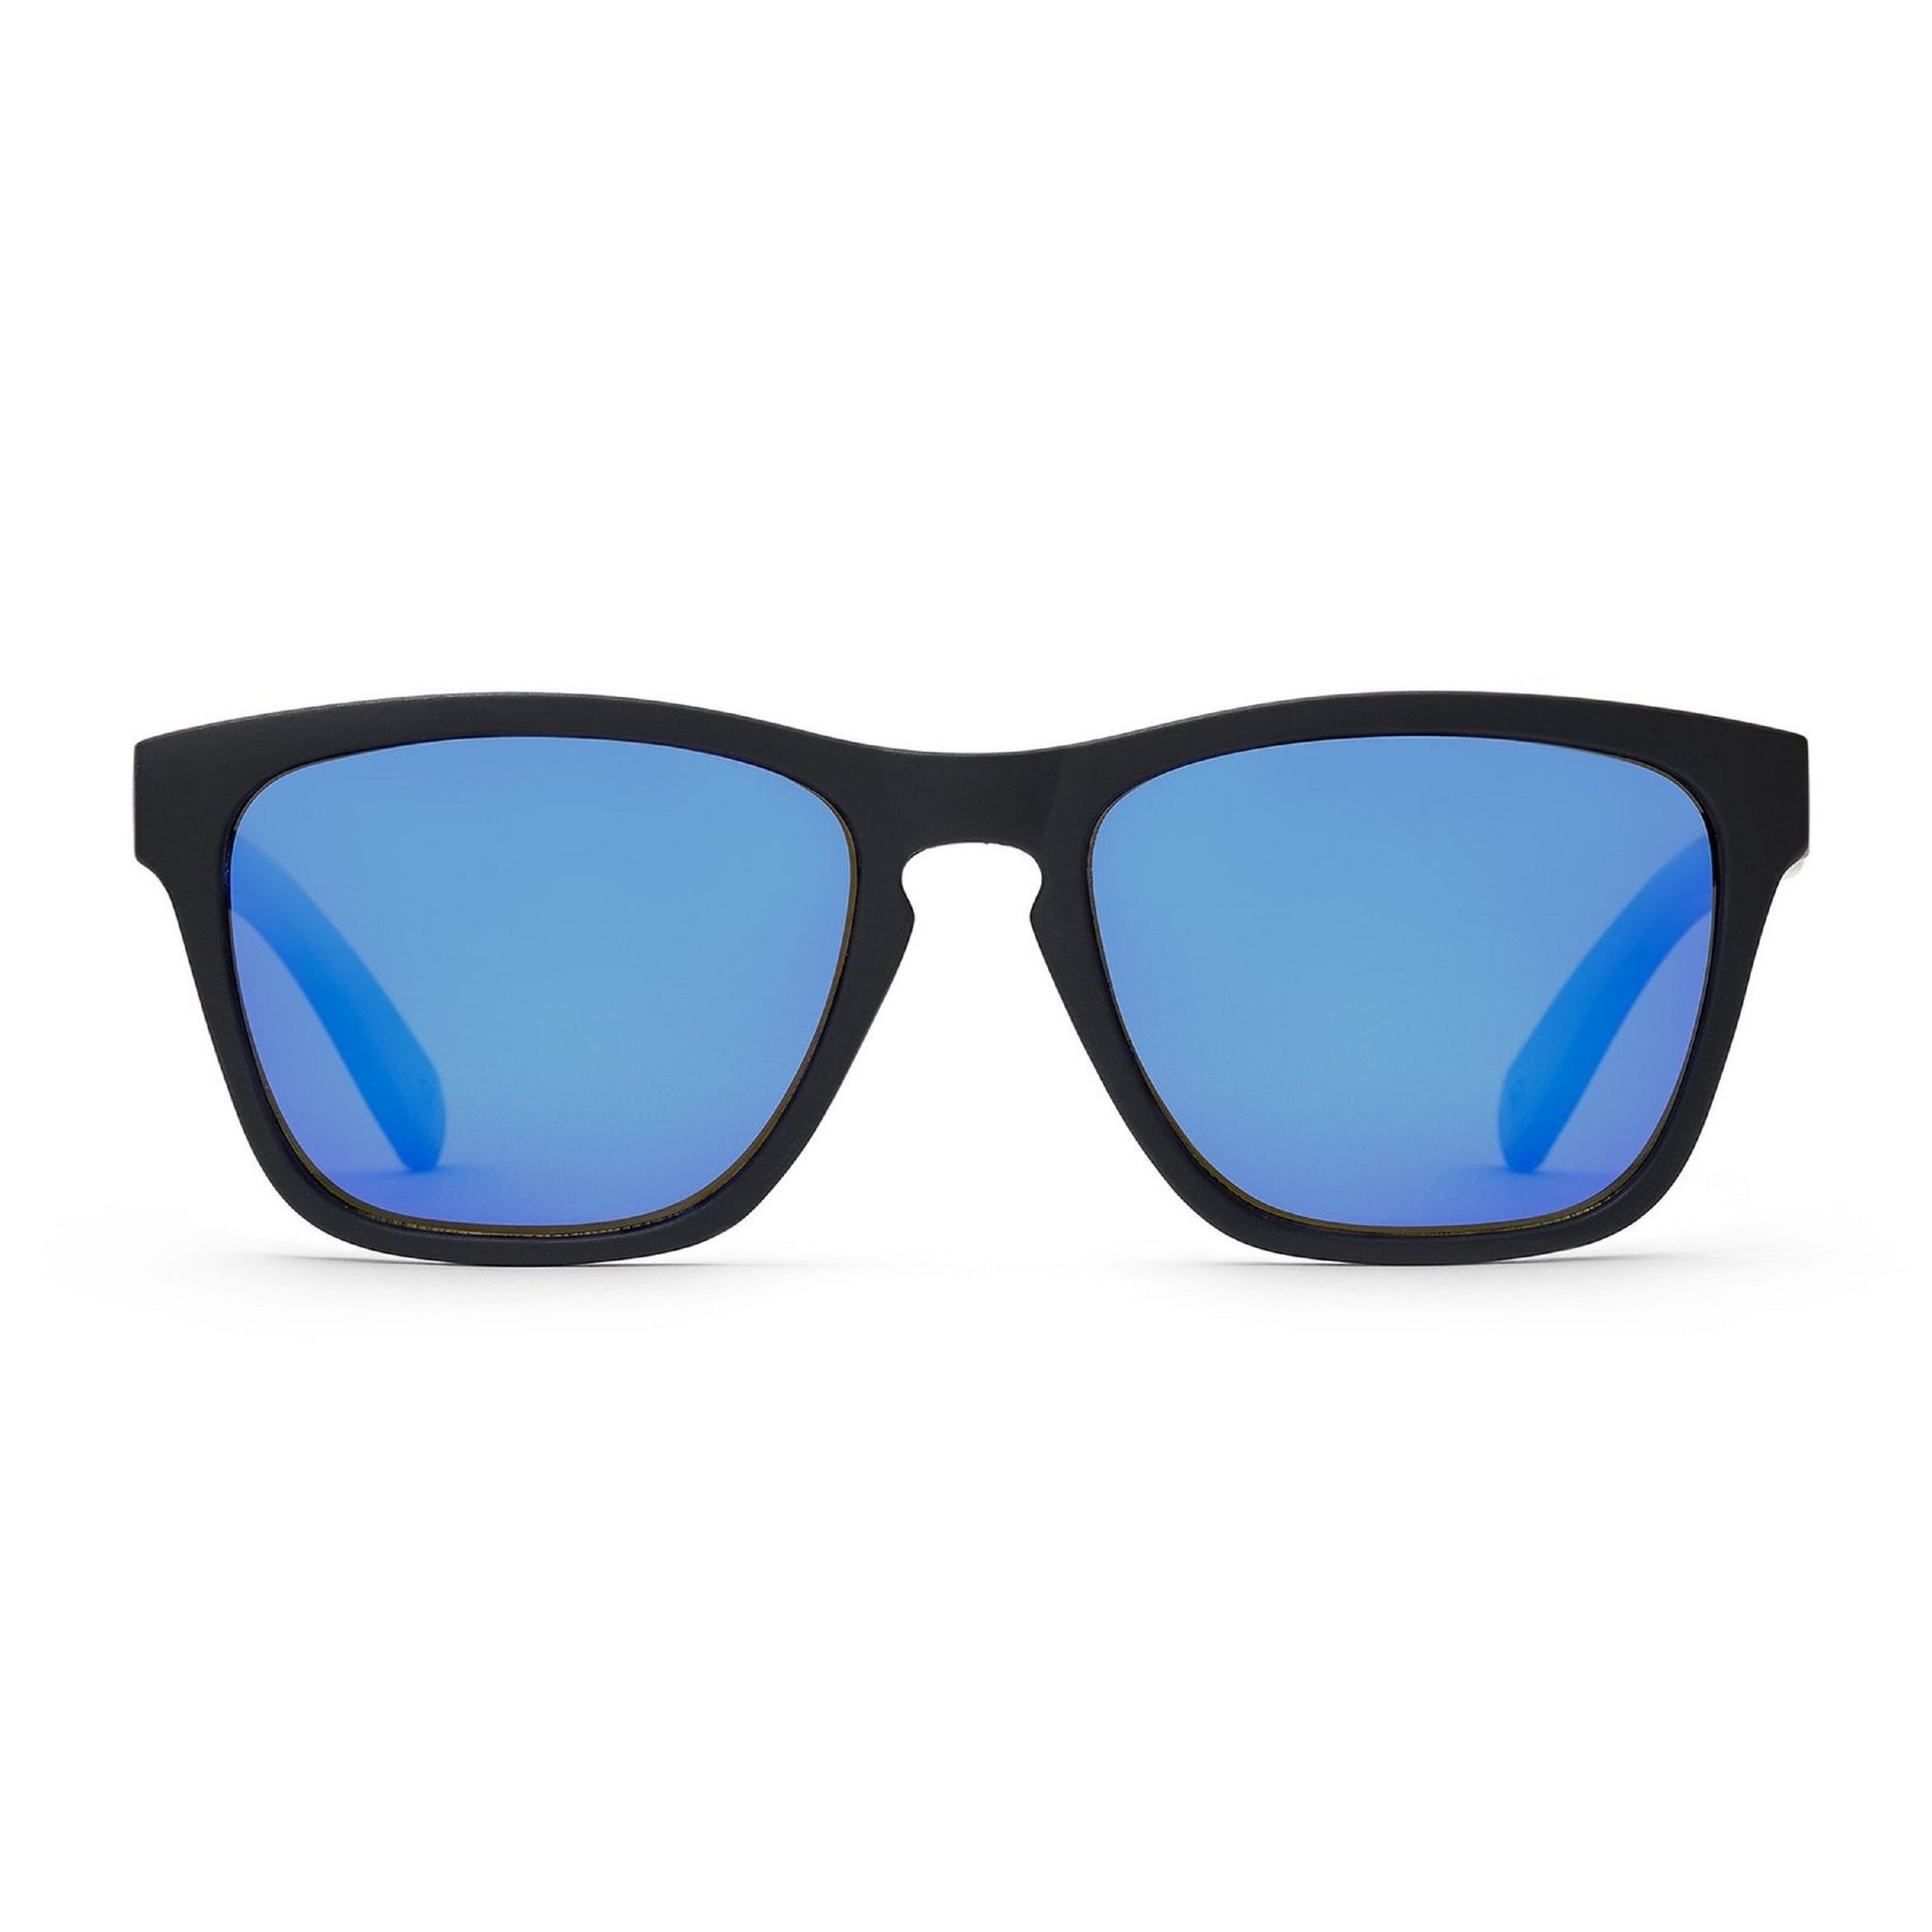 Take A Shot The Butterfly 2.0 Polarized Sunglasses